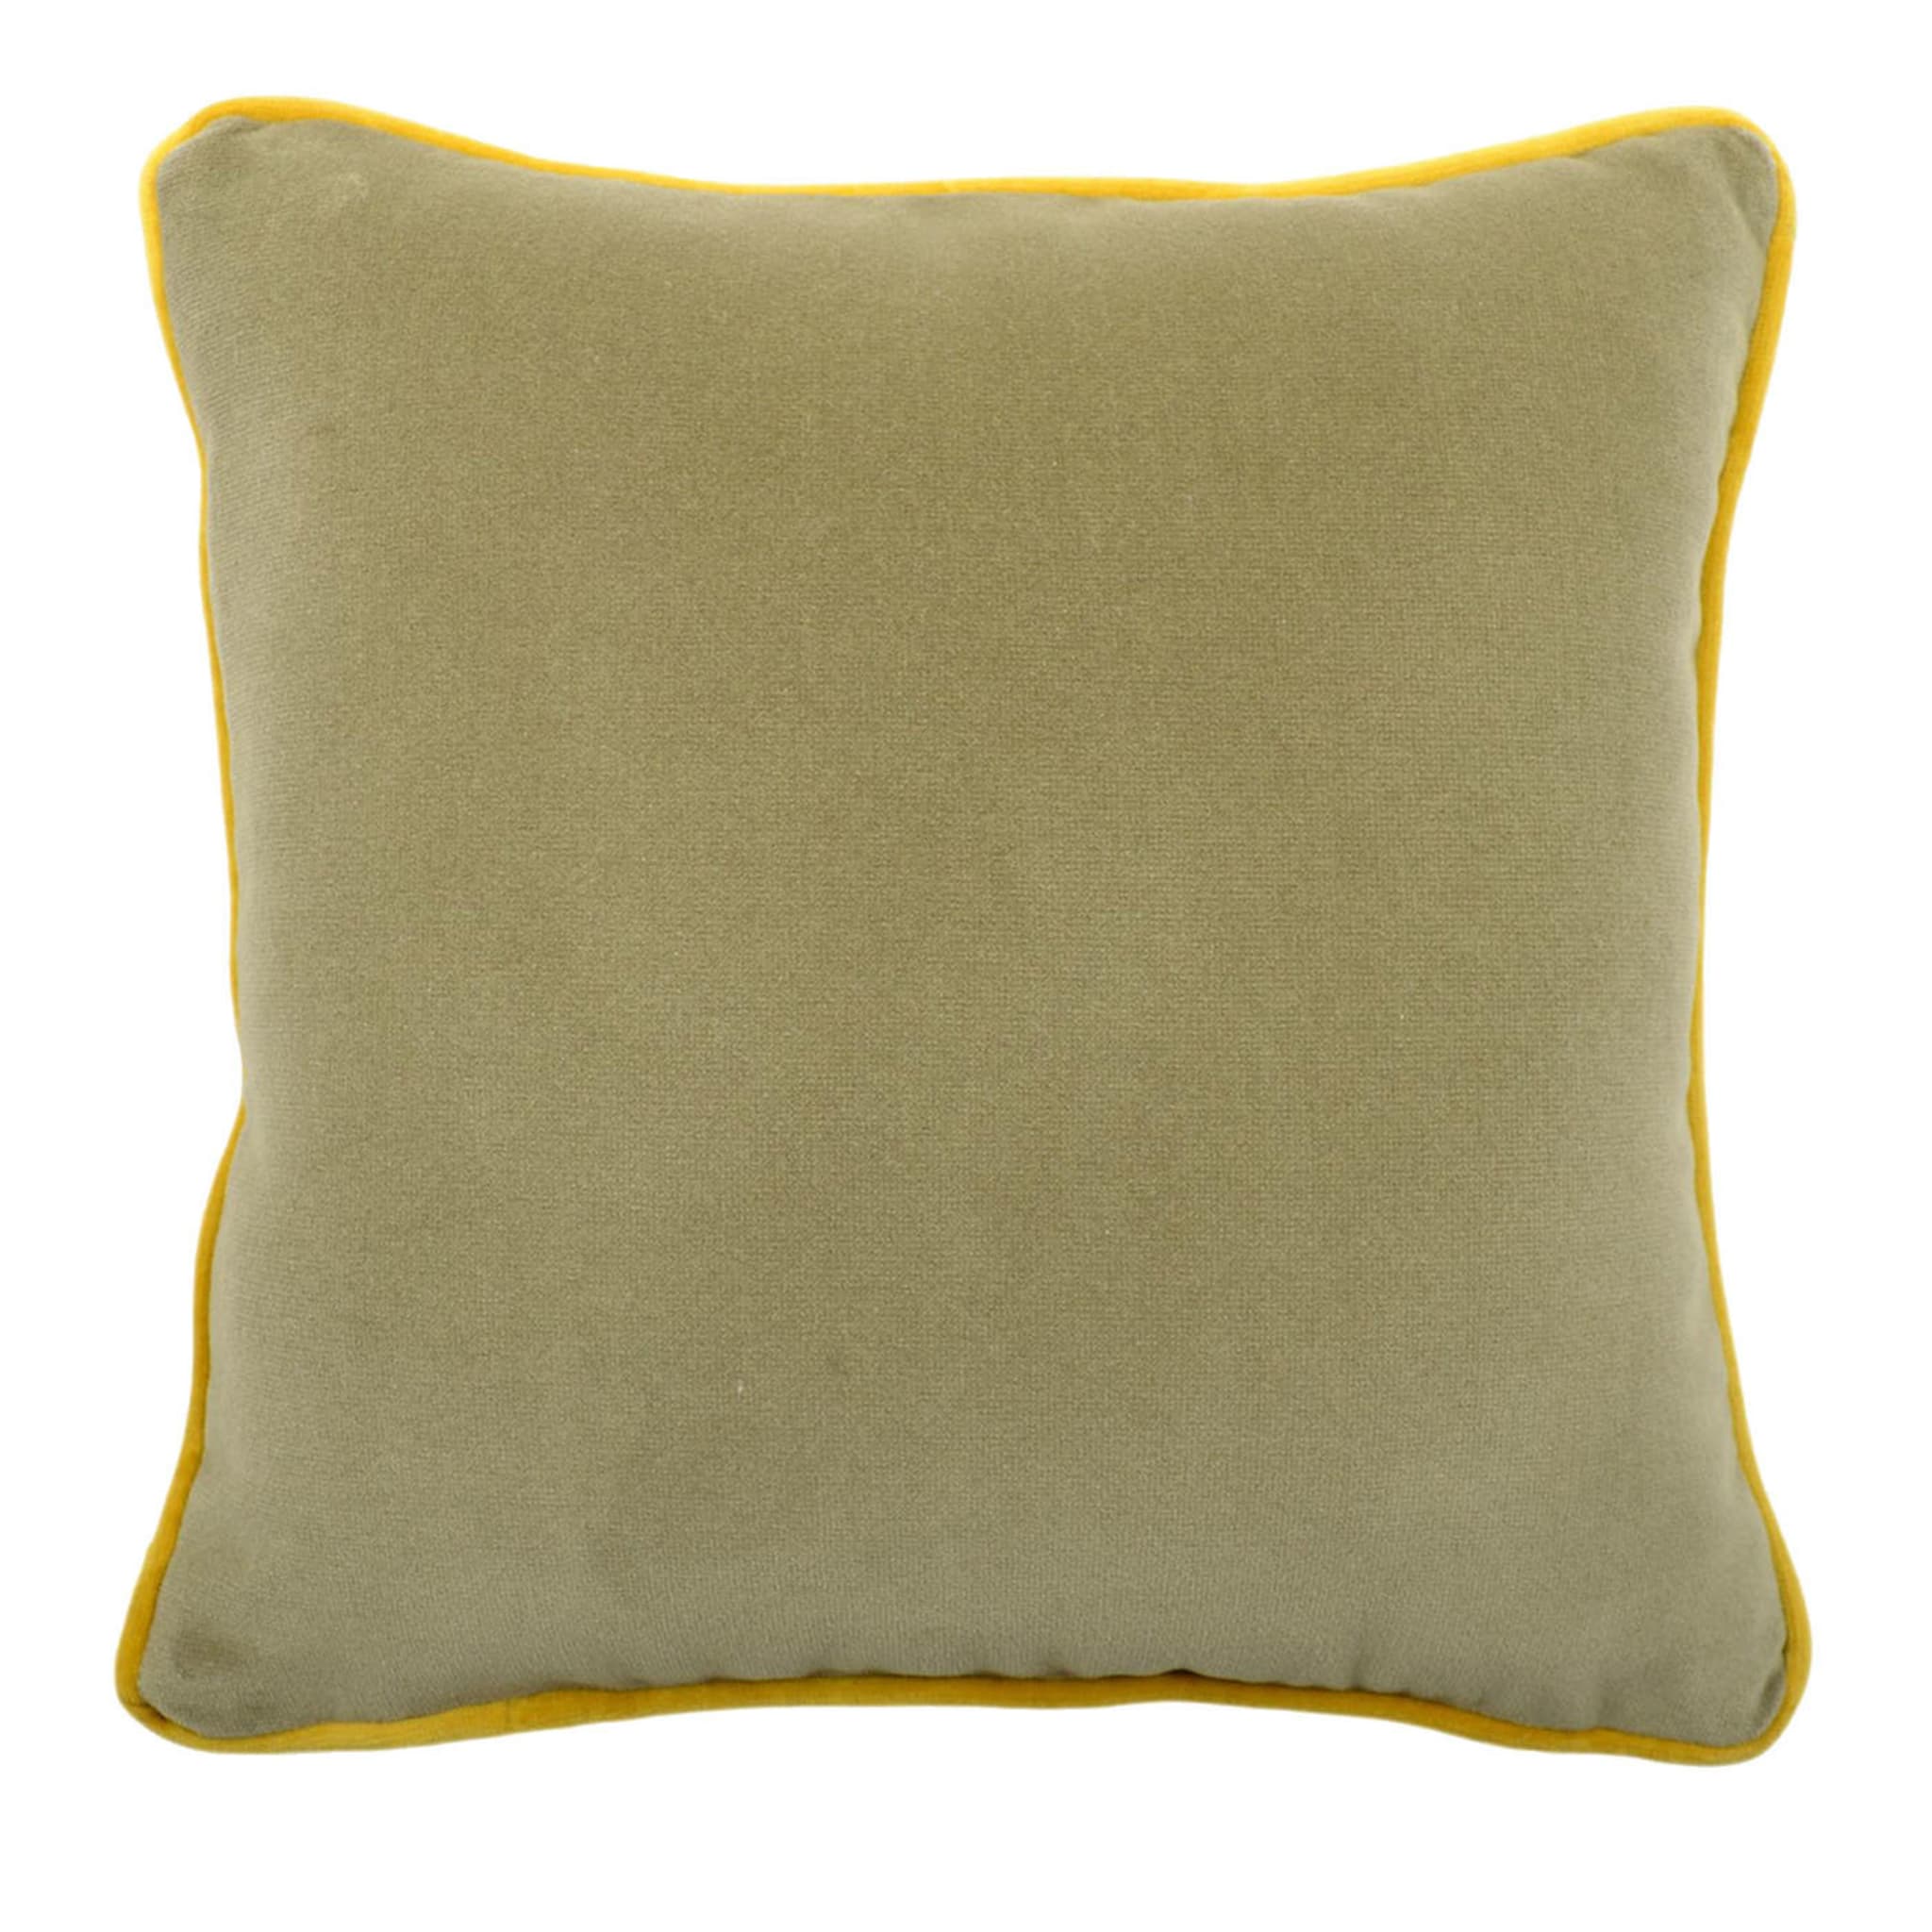 Carrè Cushion in moss cotton velvet and jacquard fabric - Main view